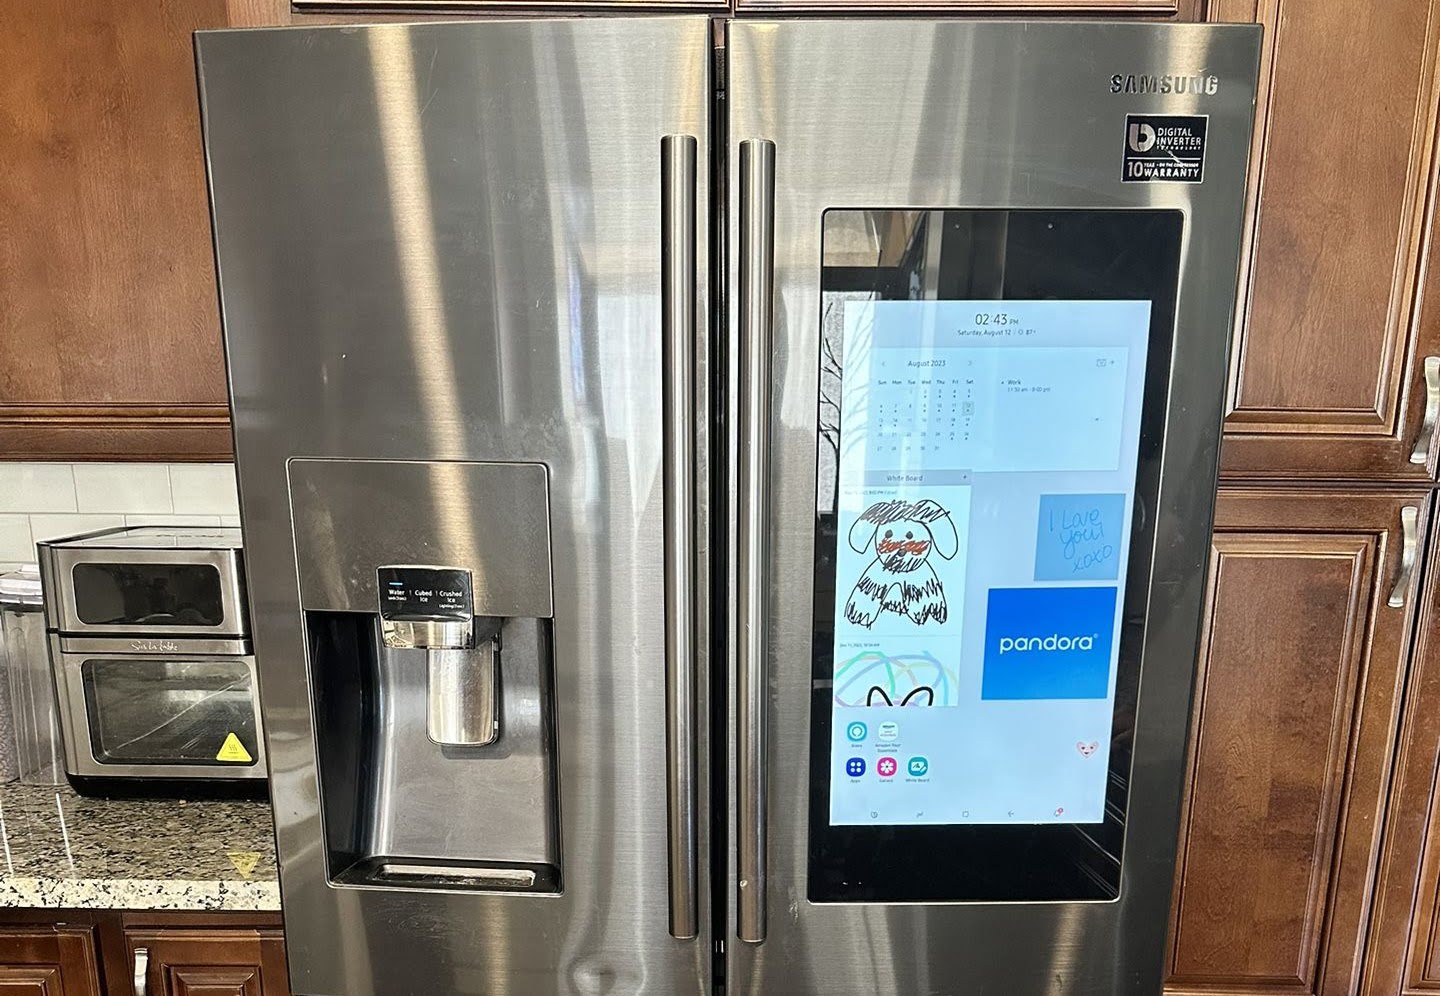 How To Fix The Error Code FdH, RdH, Or DH For Samsung Refrigerator